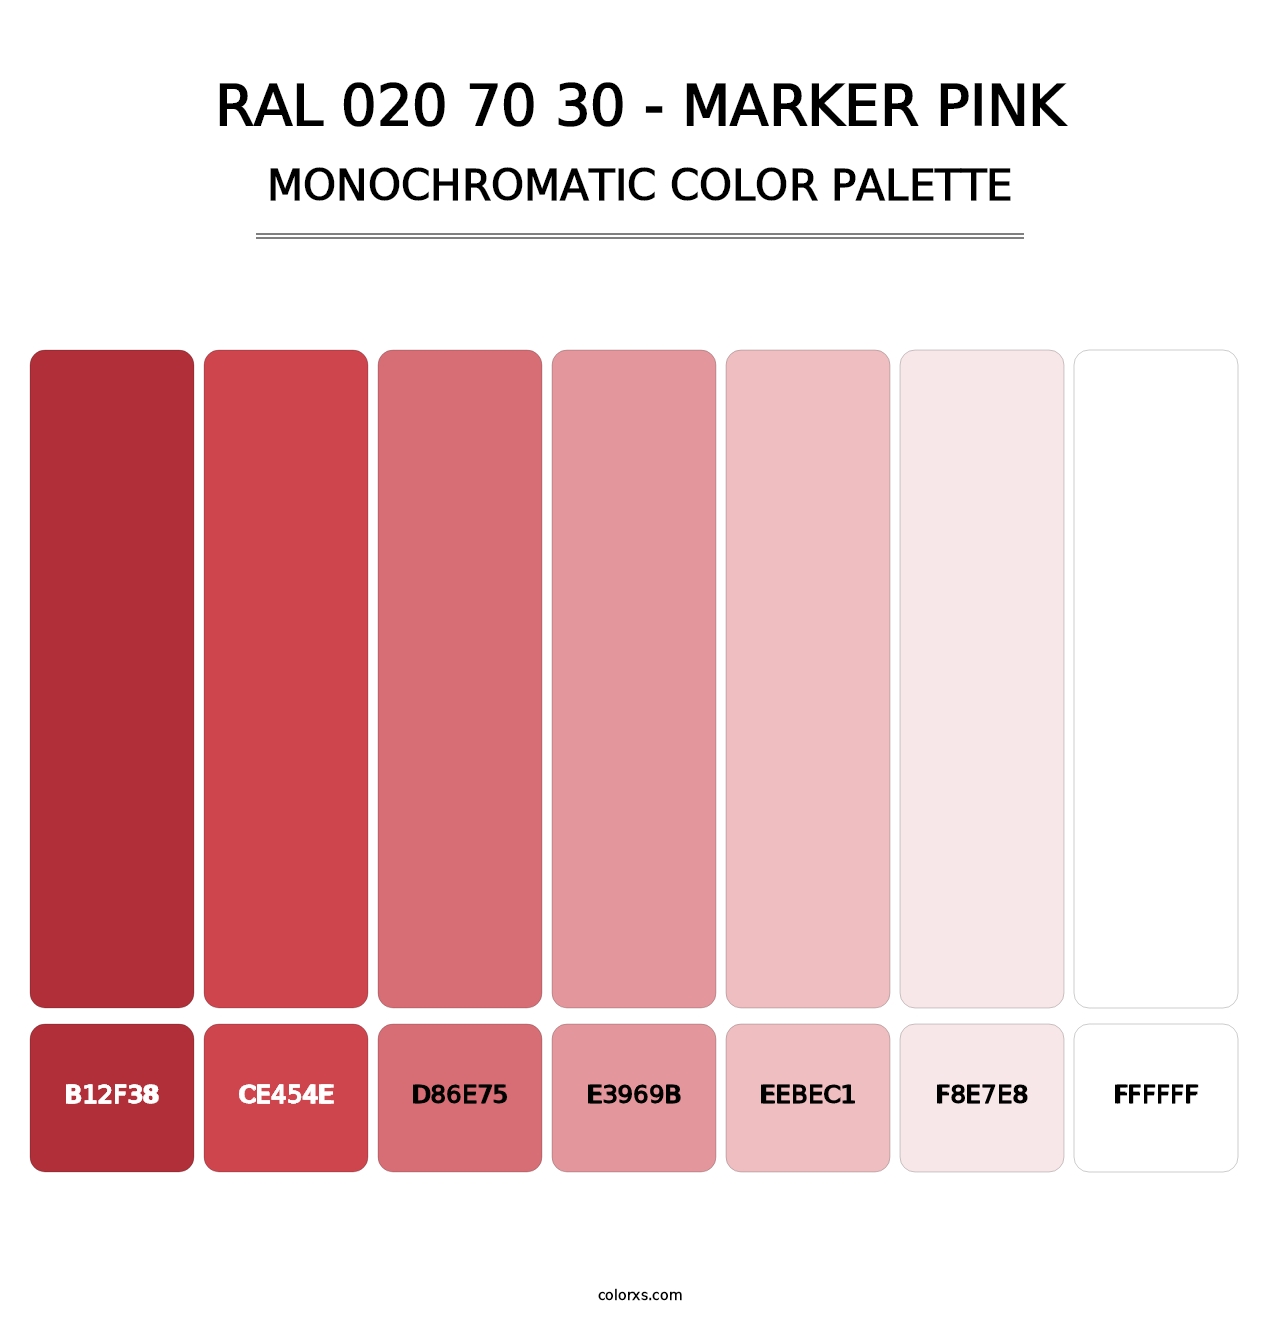 RAL 020 70 30 - Marker Pink - Monochromatic Color Palette